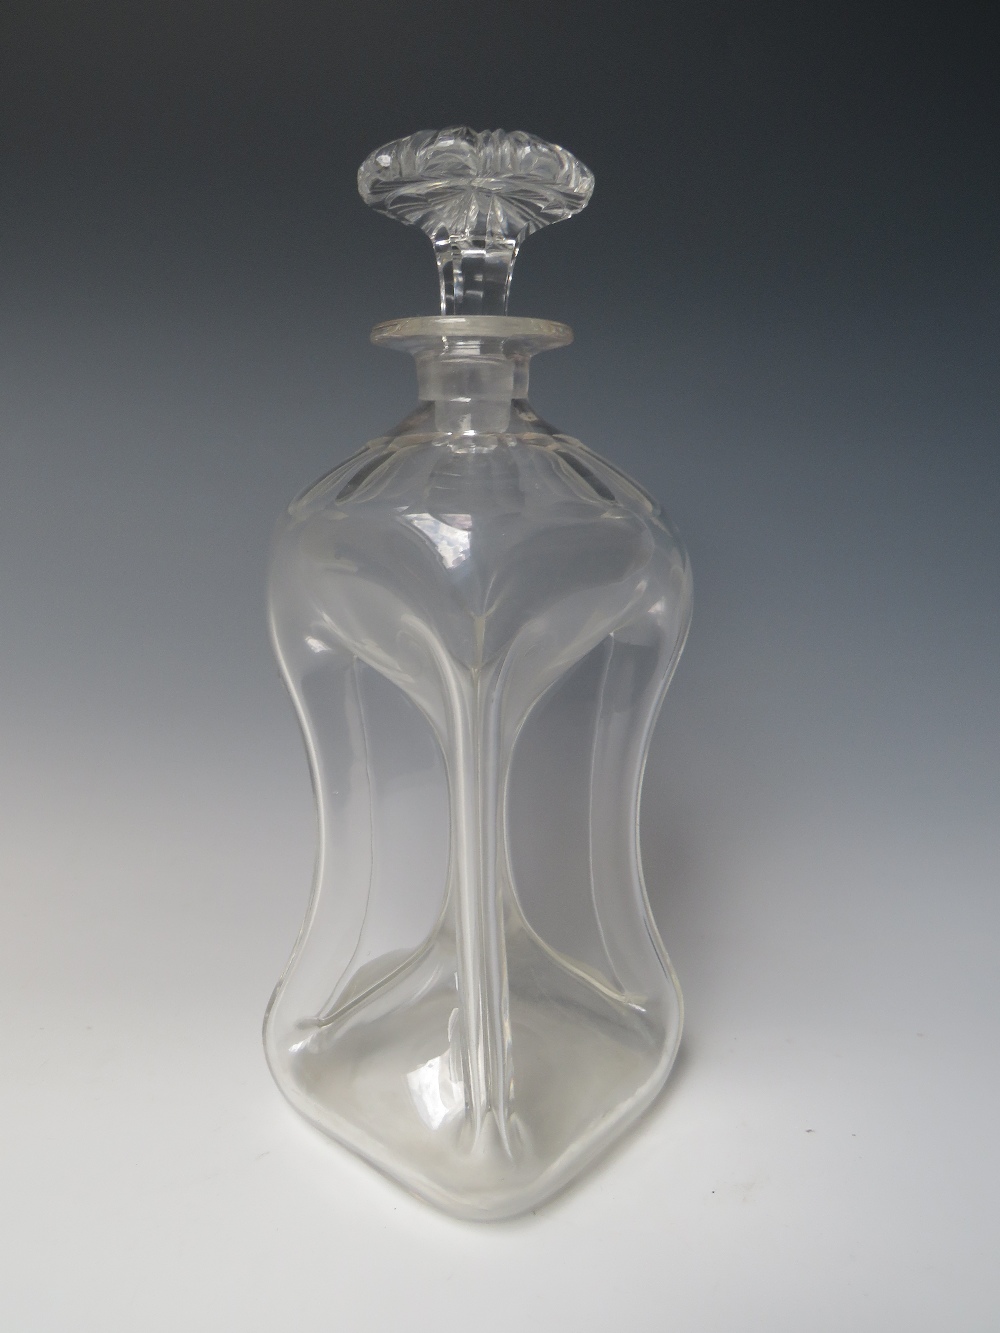 AN ANTIQUE CLEAR GLASS 'GLUG GLUG' DECANTER, with stopper, faceted embellishment to shoulders,